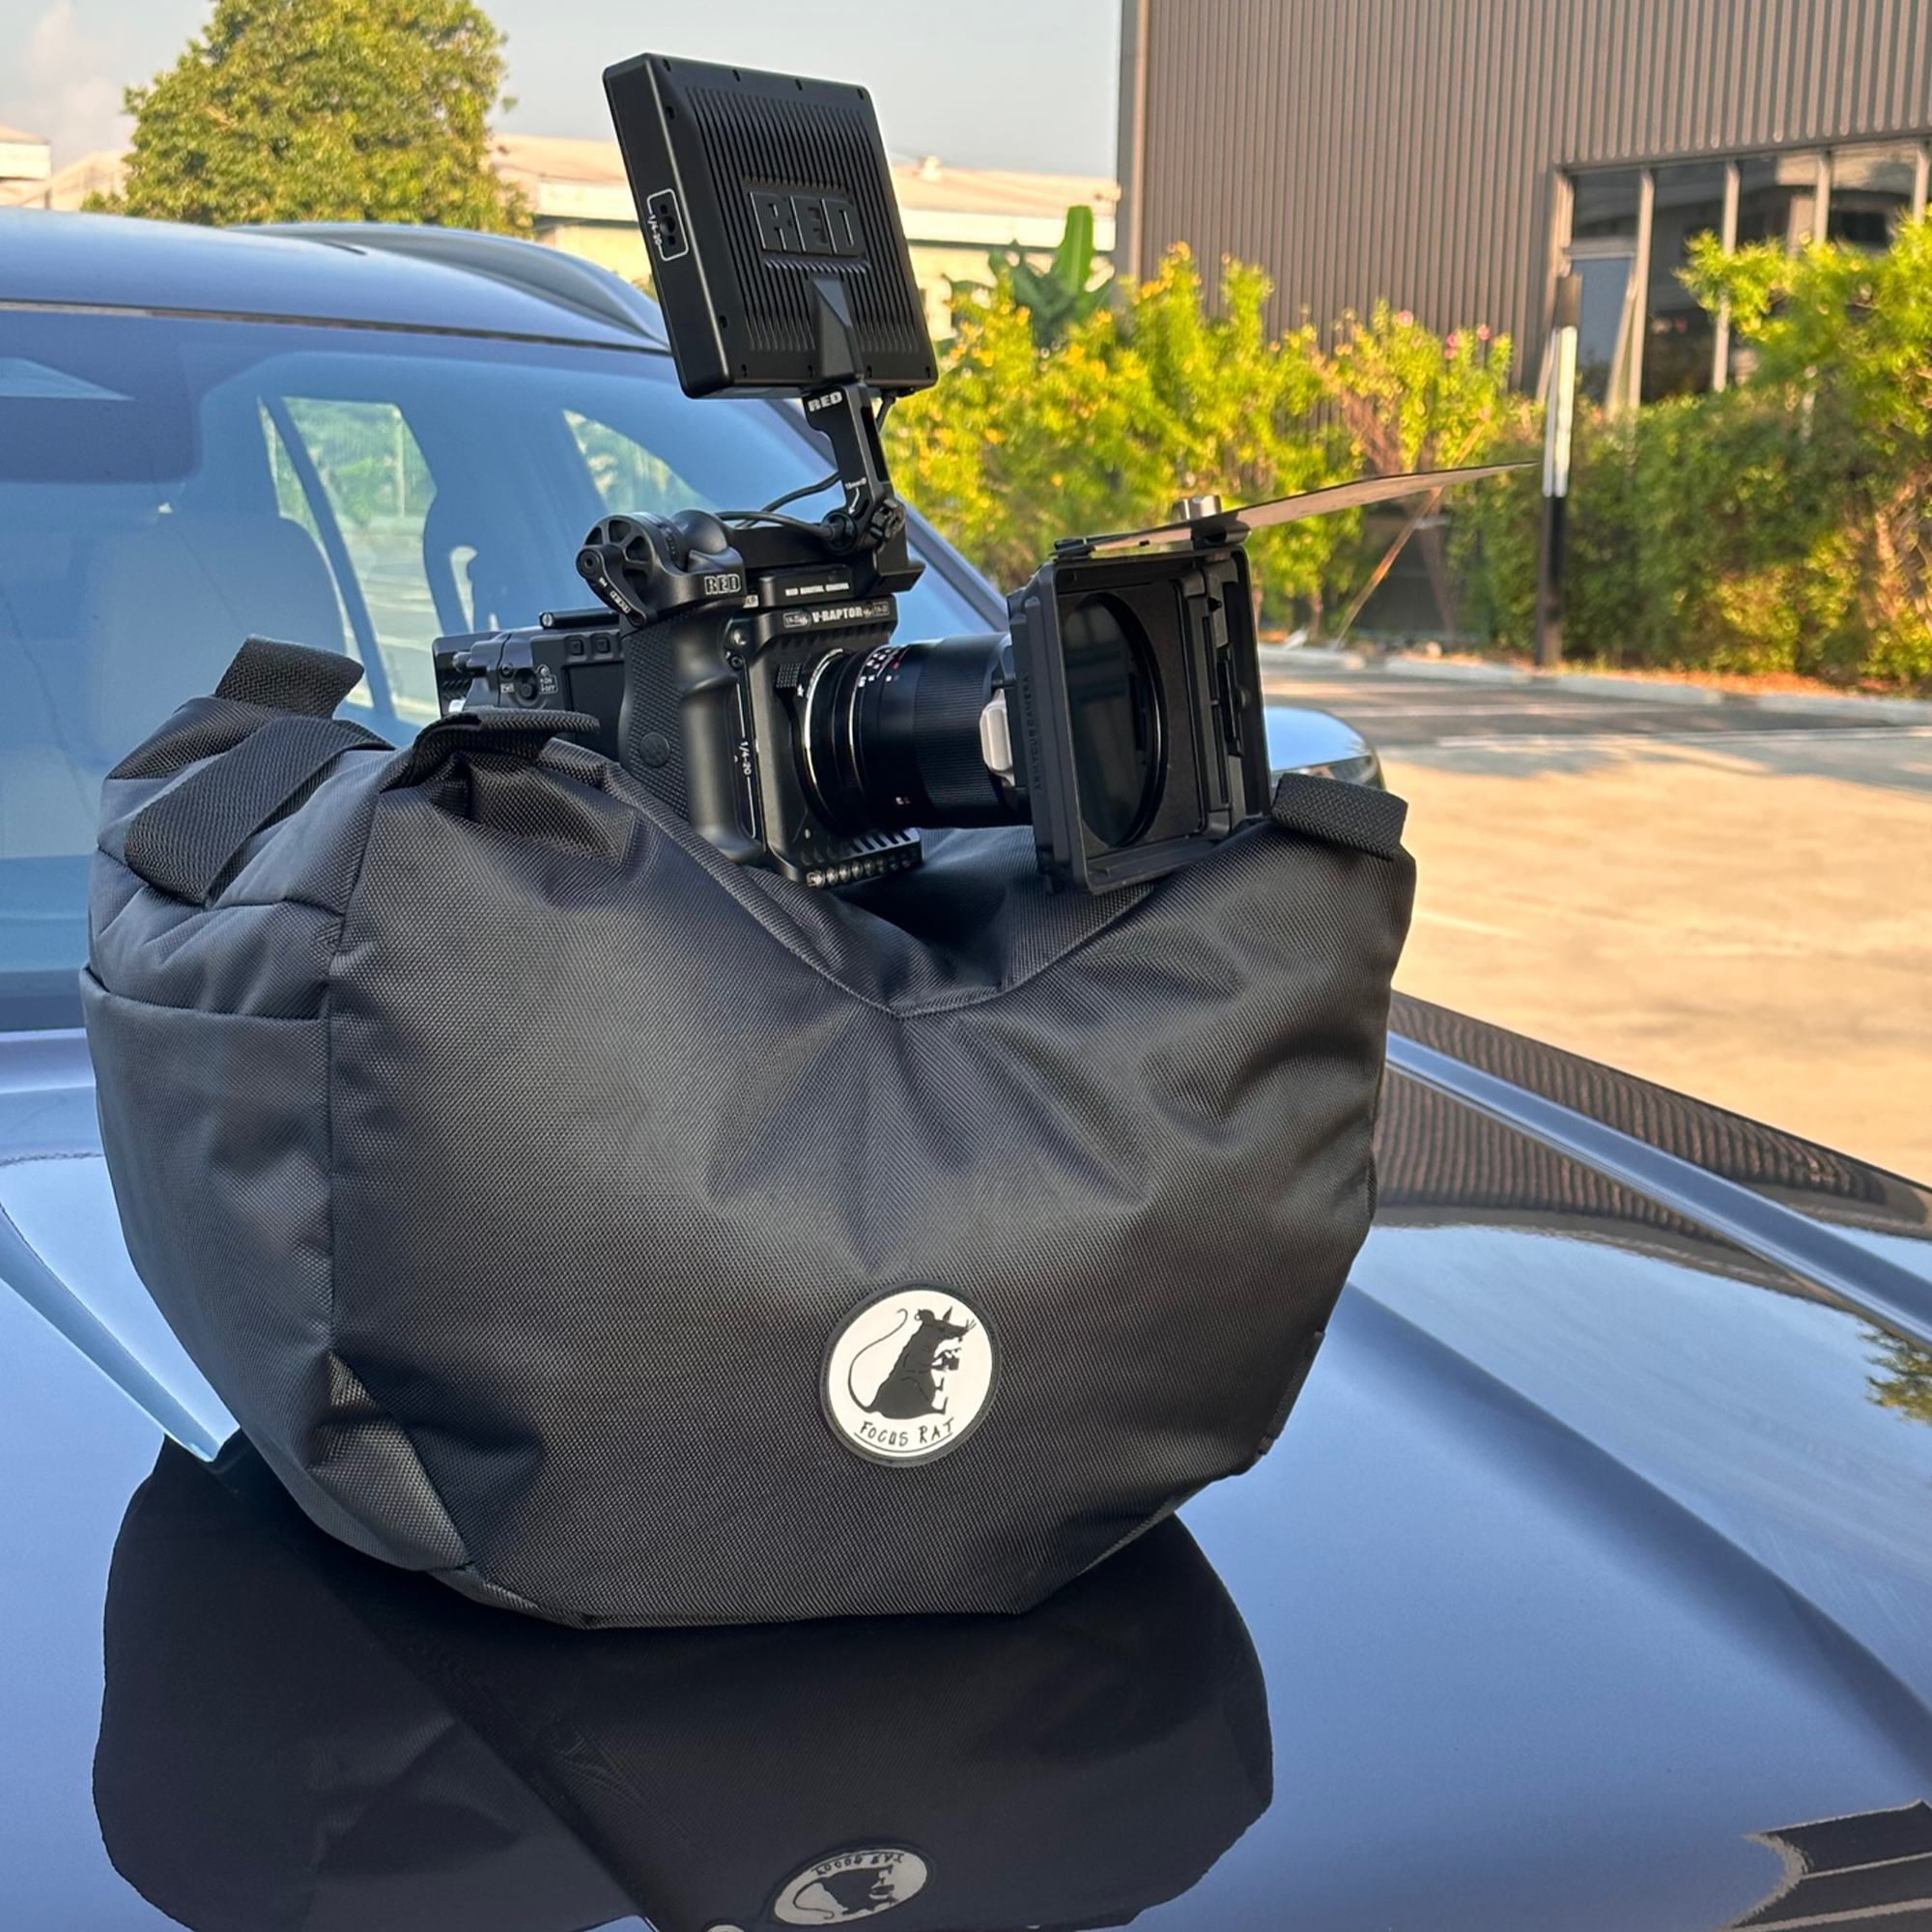 Cine Saddle like Steady Bag Large In Use with a Red Camera on a car